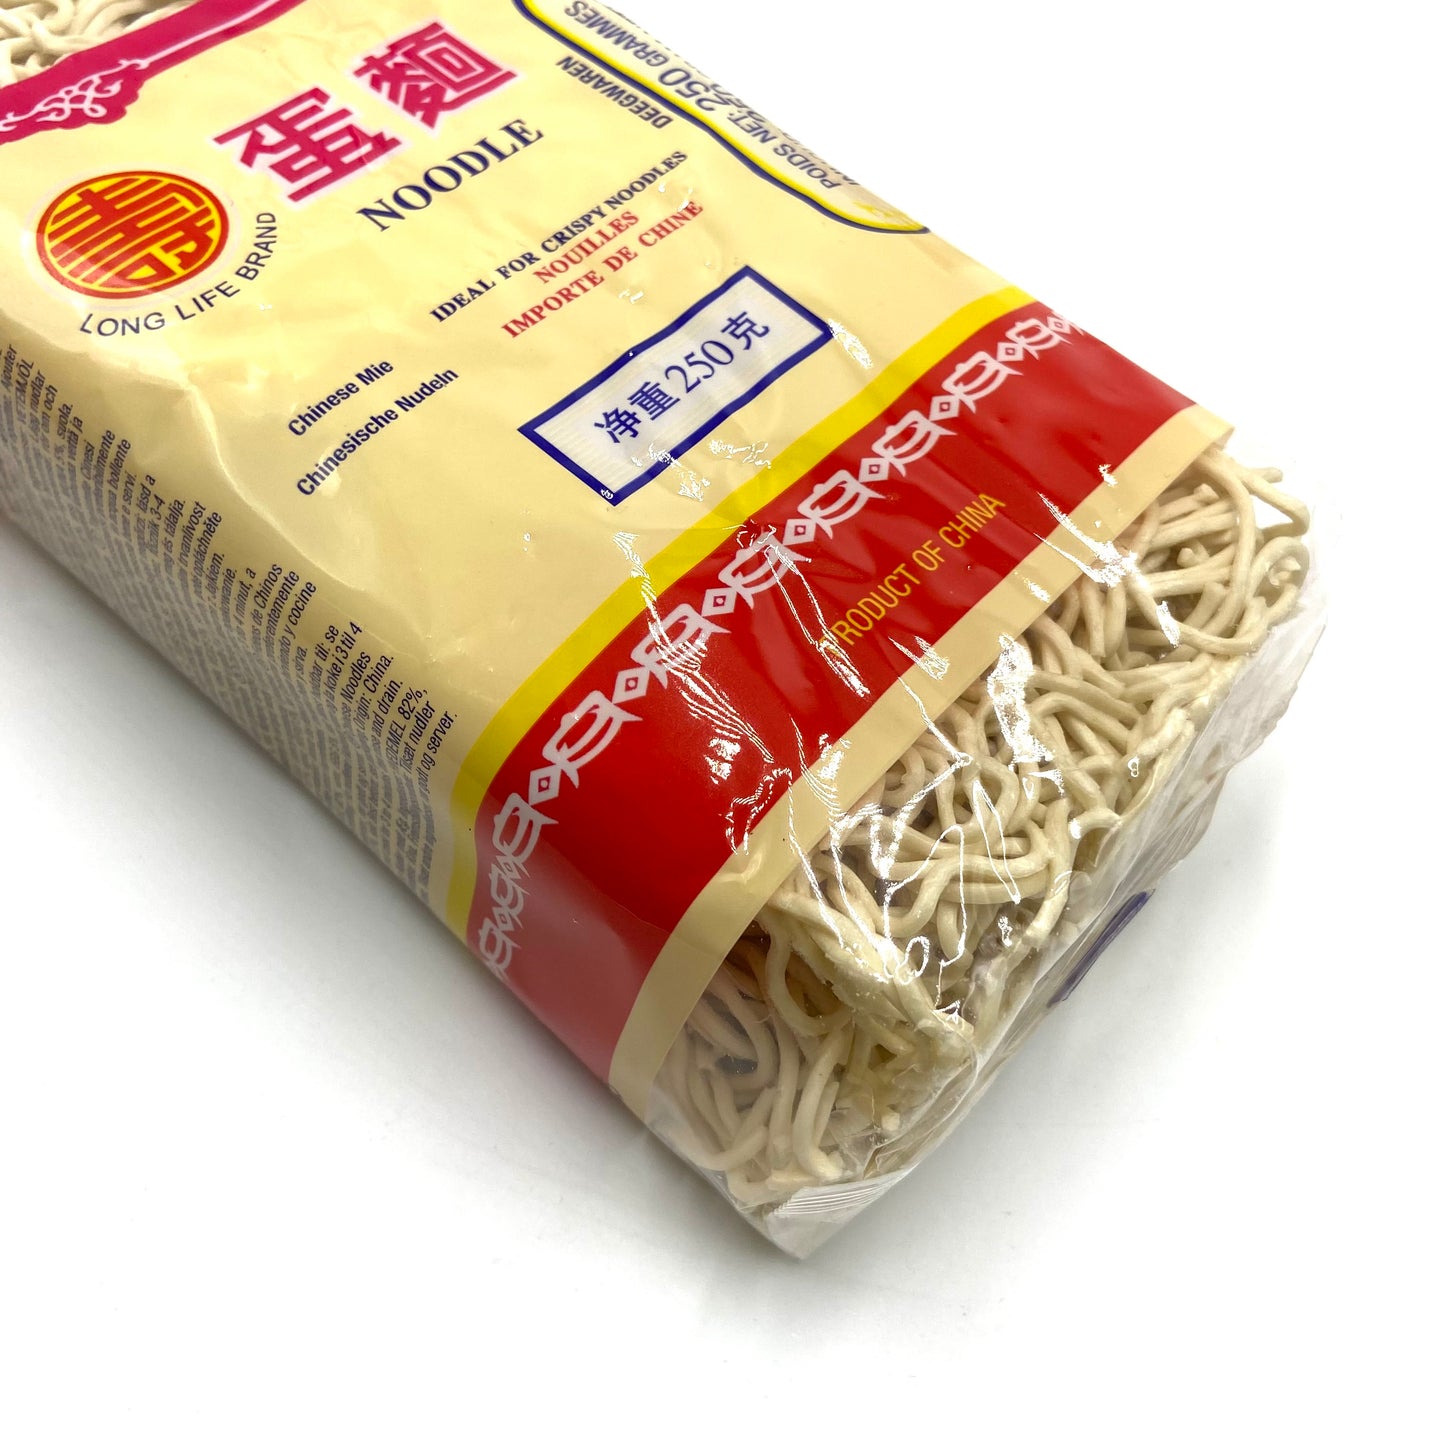 Longlife Chinese Egg Noodles 250g